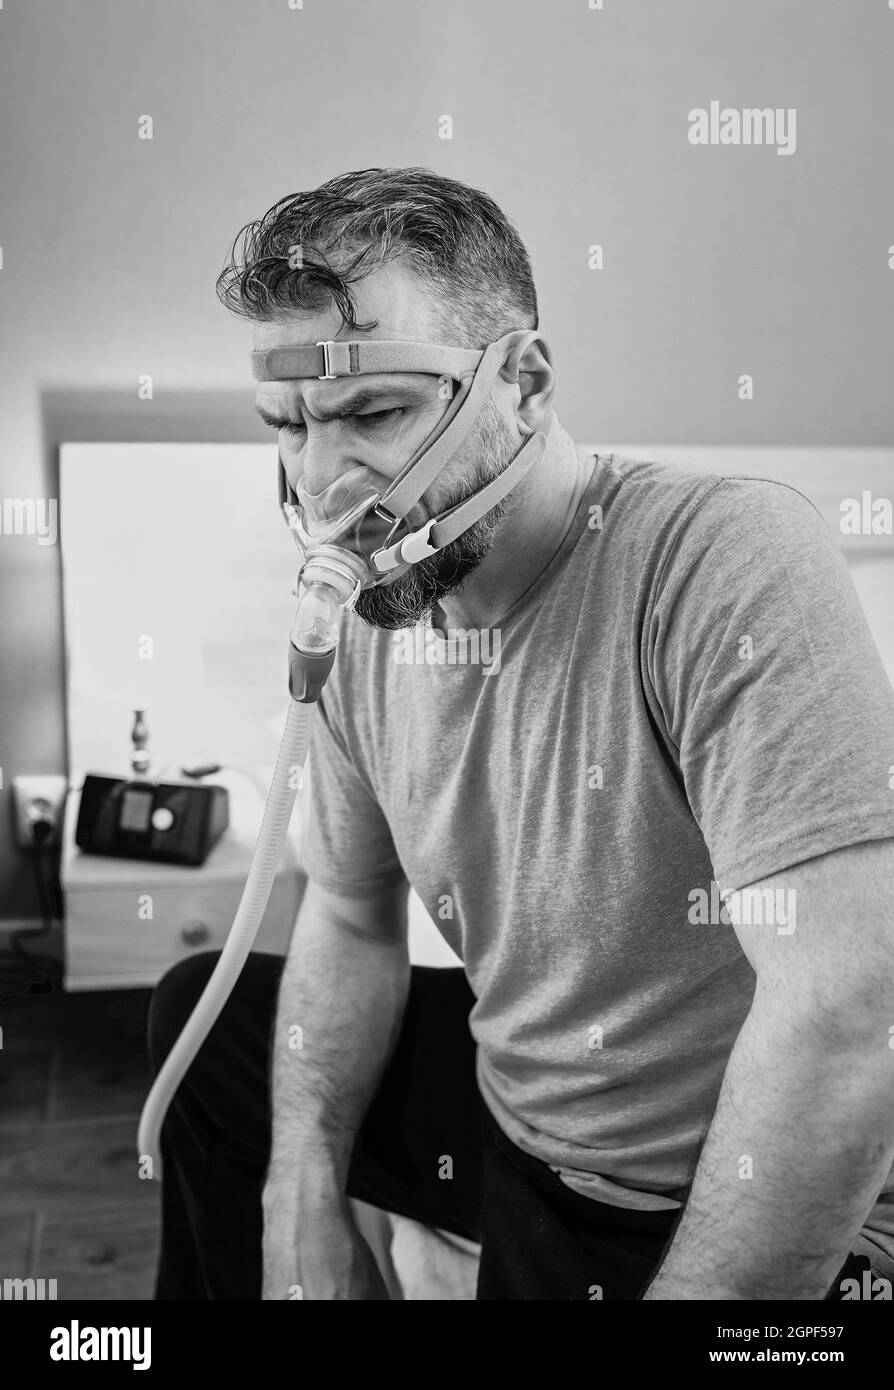 Unhappy shocked man with chronic breathing issues surprised by using  CPAP machine sitting on the bed in bedroom. Stock Photo